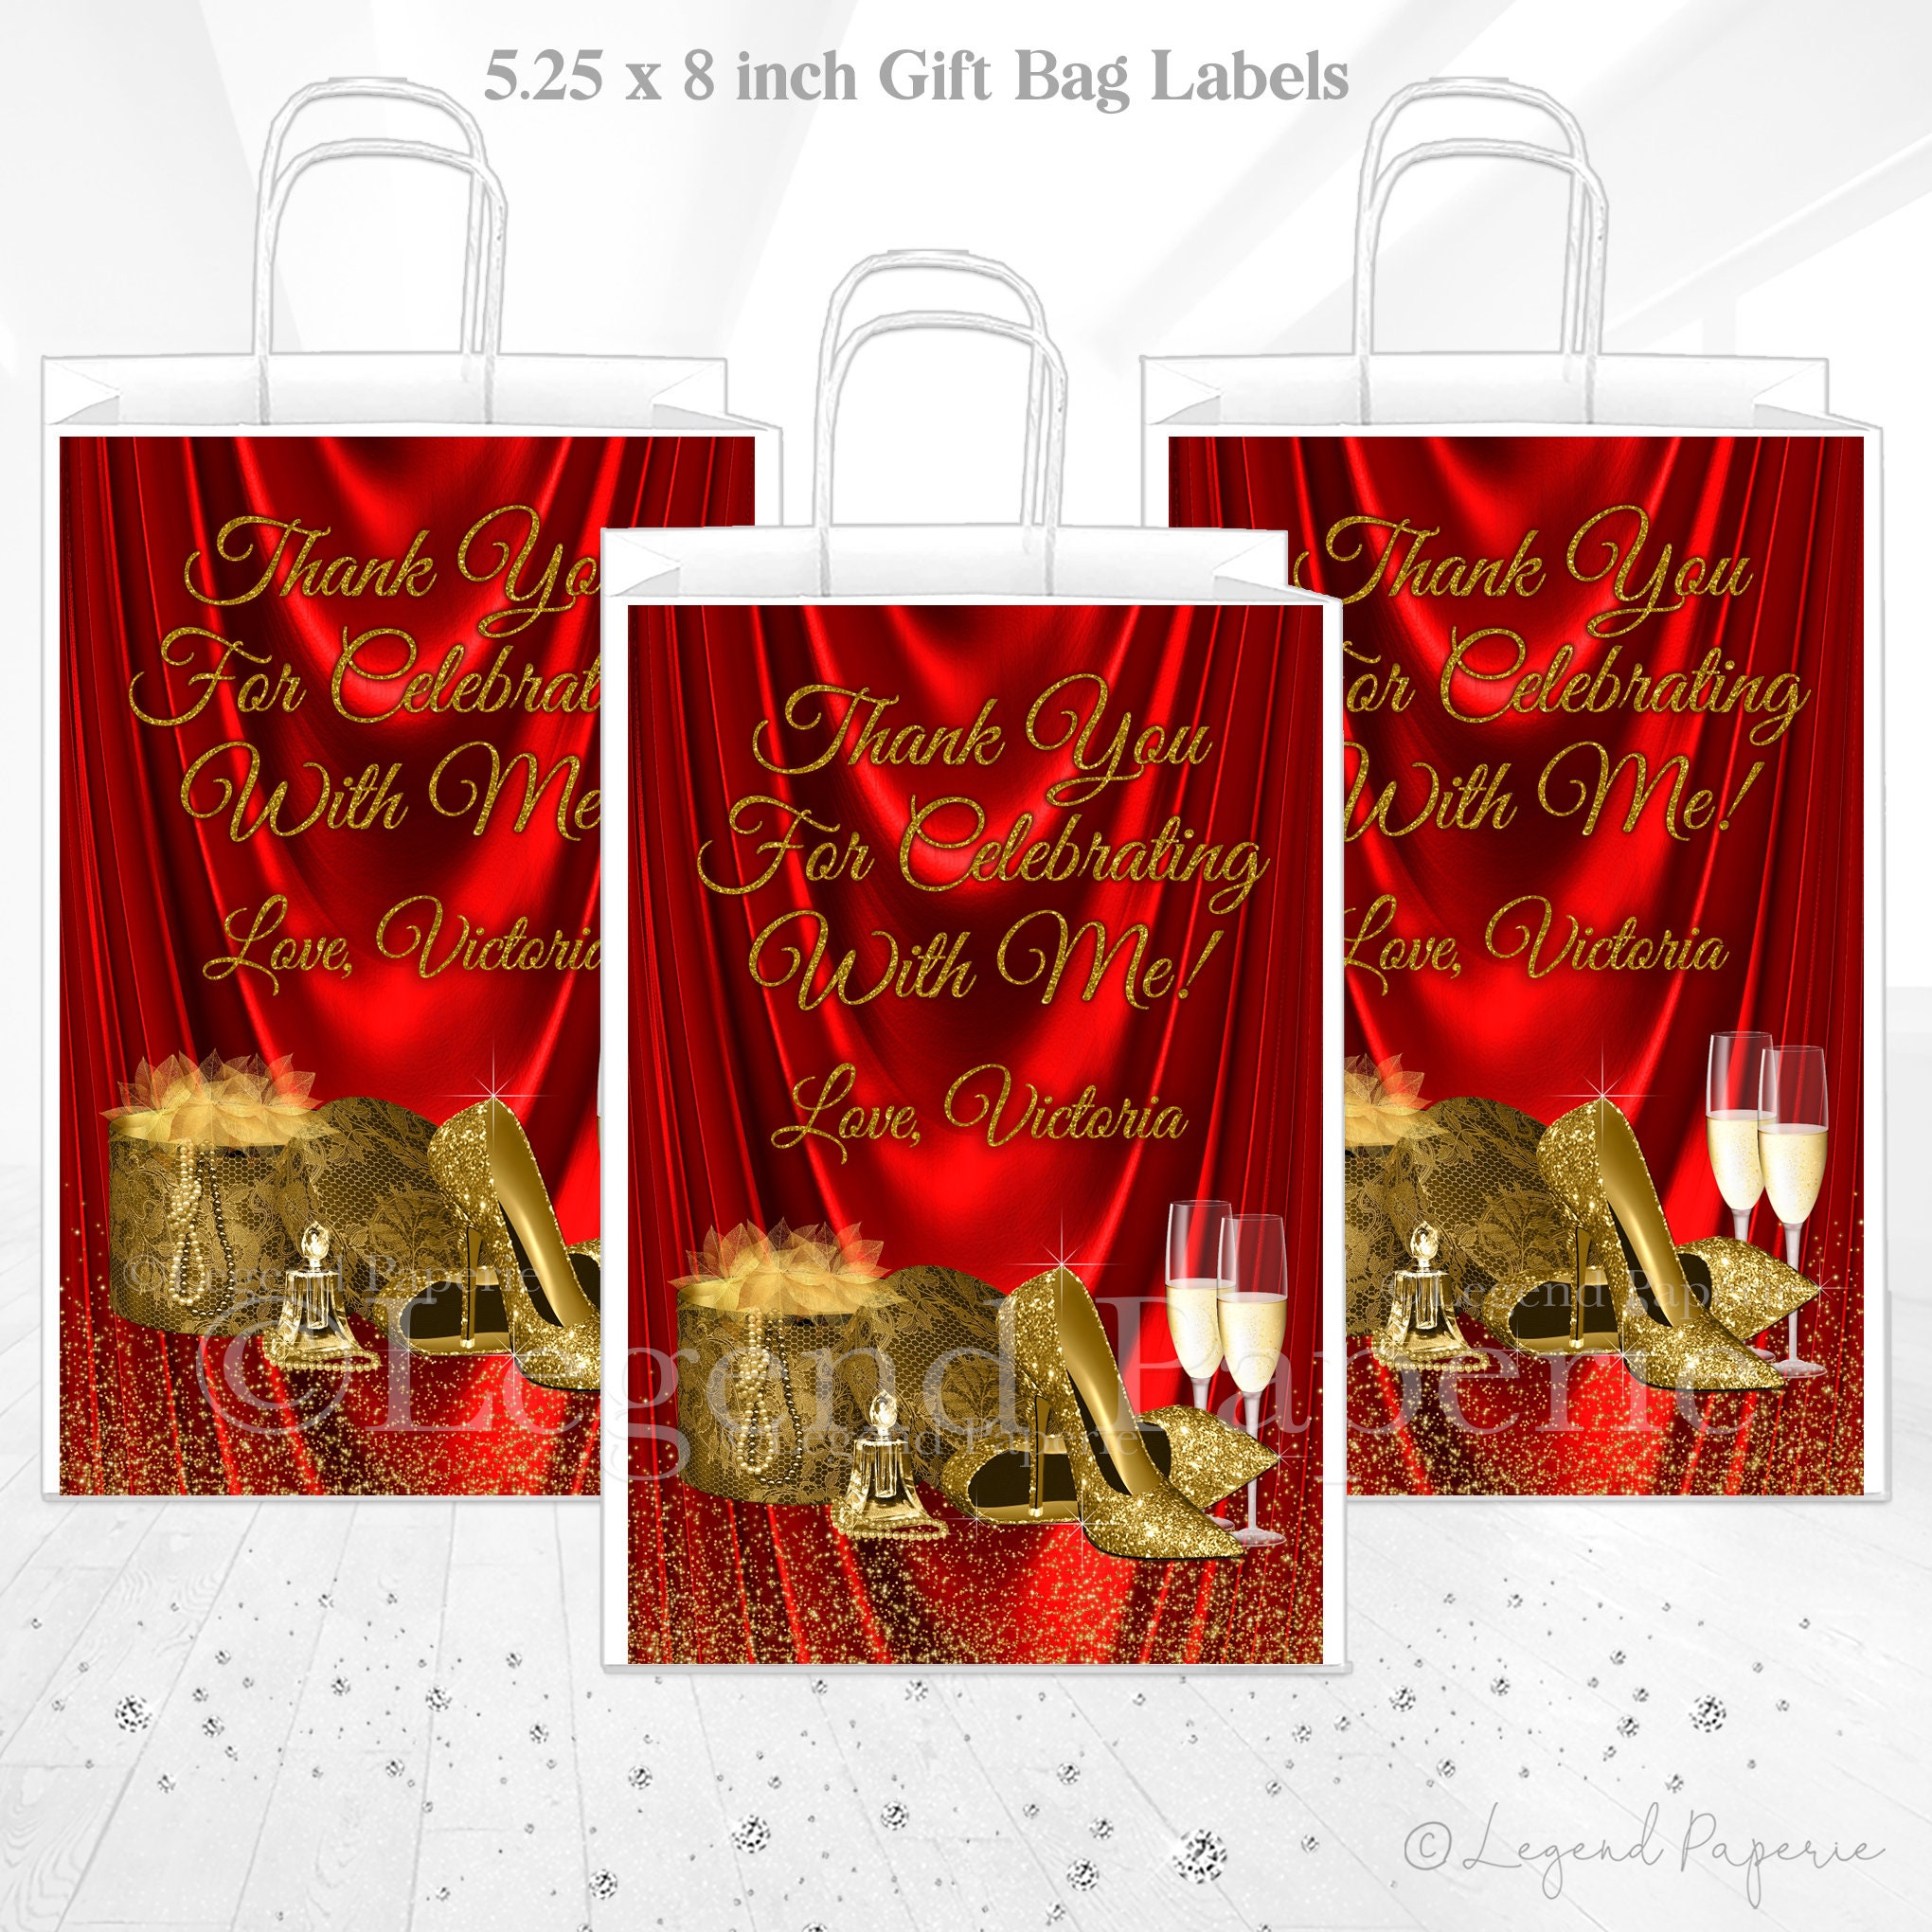 20 Royal Blue & Gold Birthday Party Favor Bags for Guests With